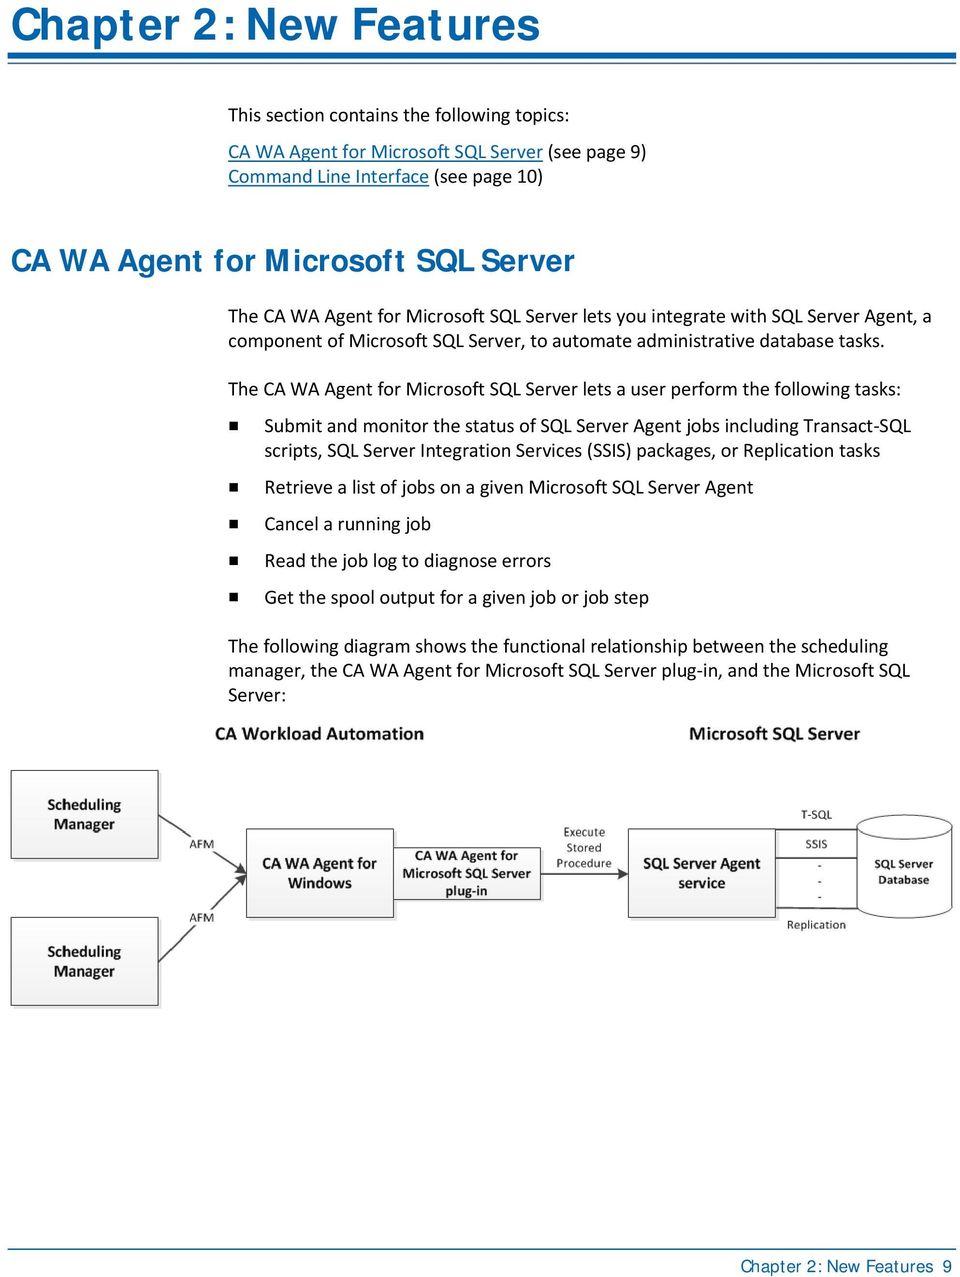 The CA WA Agent for Microsoft SQL Server lets a user perform the following tasks: Submit and monitor the status of SQL Server Agent jobs including Transact-SQL scripts, SQL Server Integration